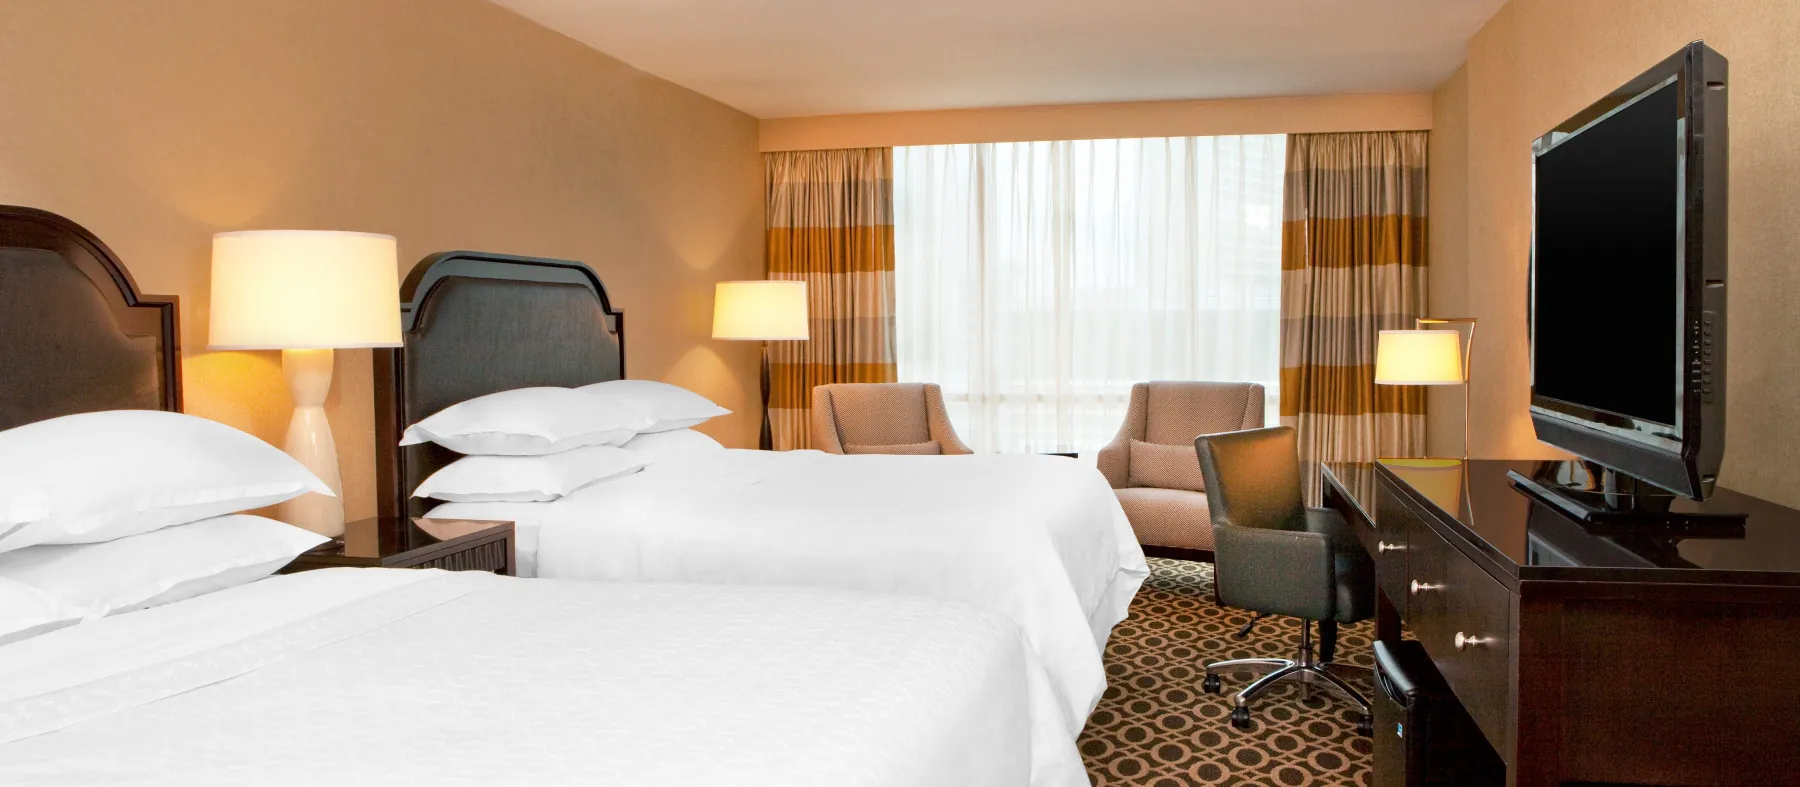 Double deluxe room at the courtland grand